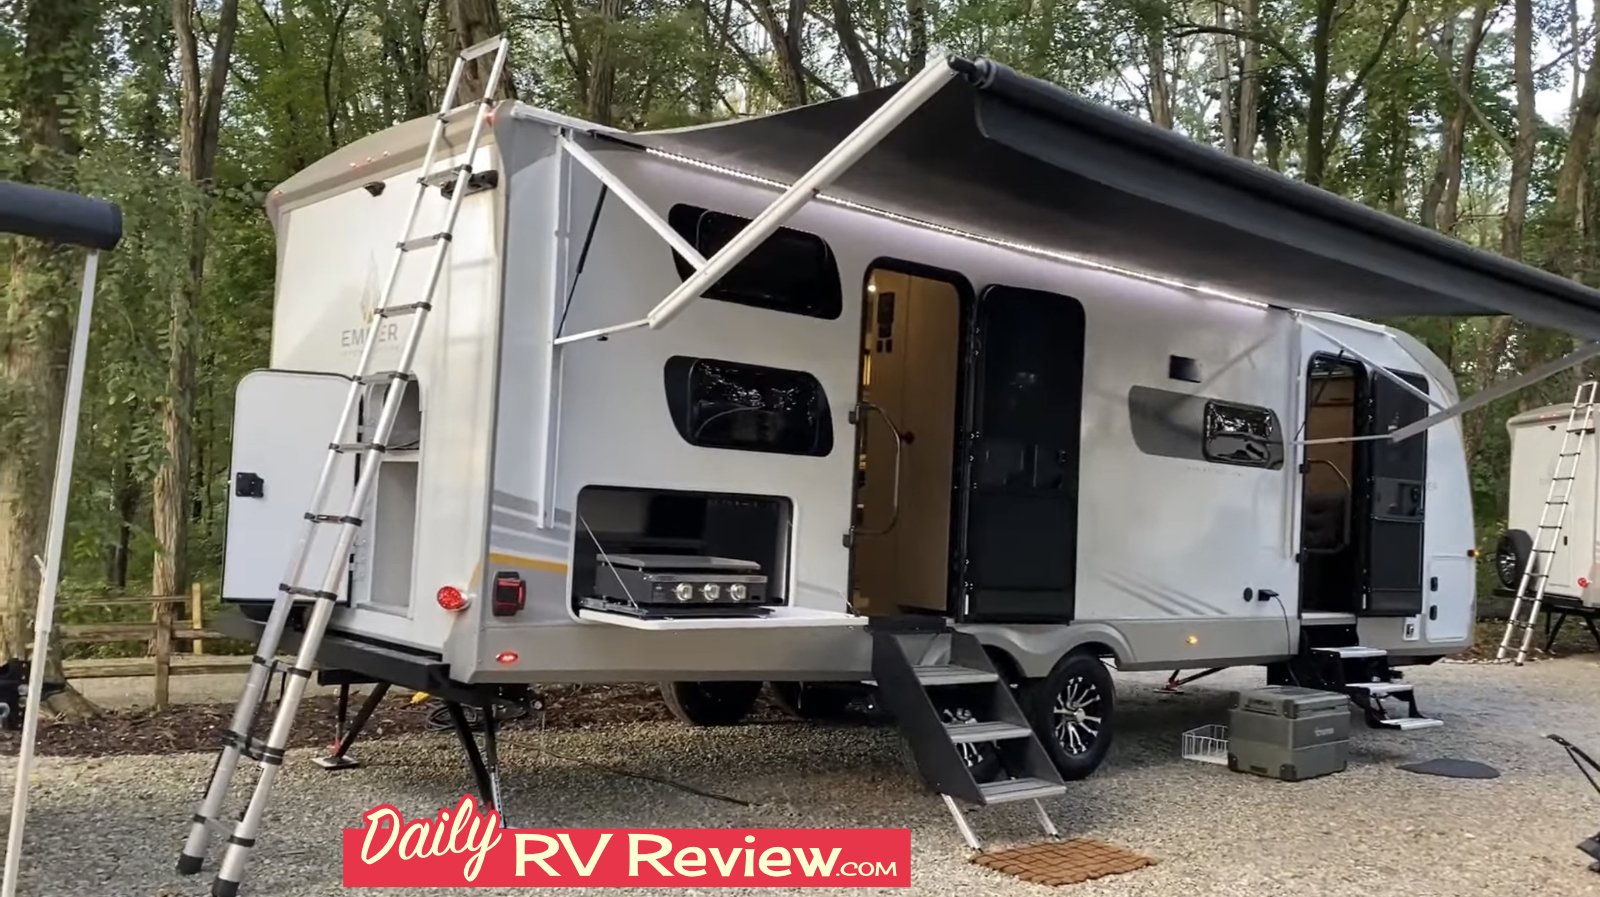 Ember RV Touring Edition back